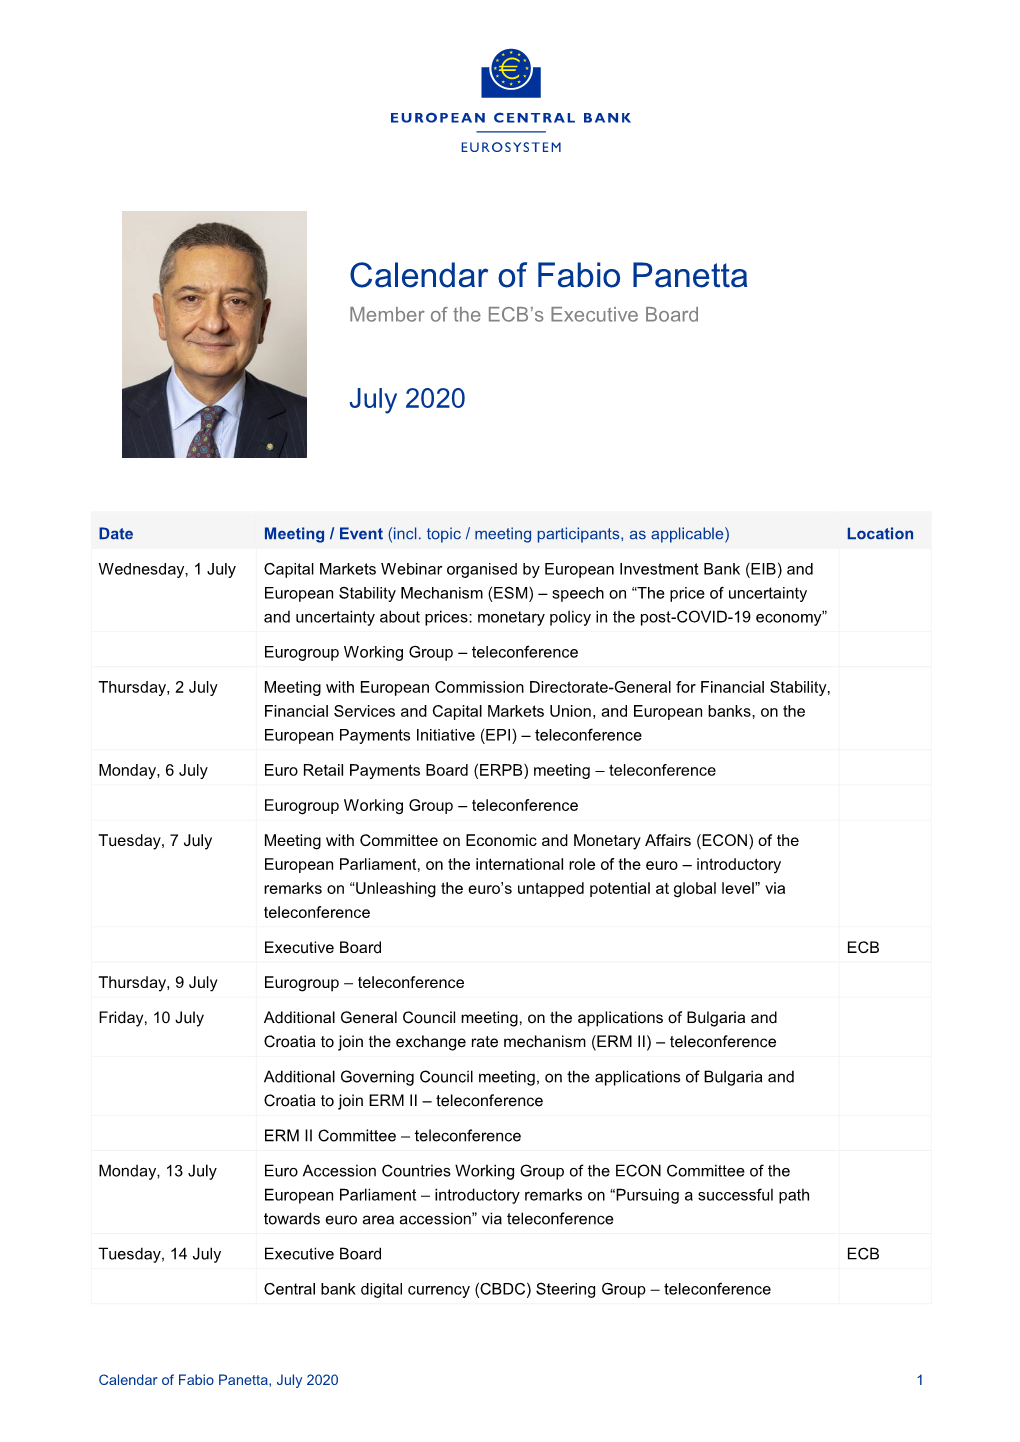 Calendar of Fabio Panetta, July 2020 1 Wednesday, 15 July Governing Council – Teleconference